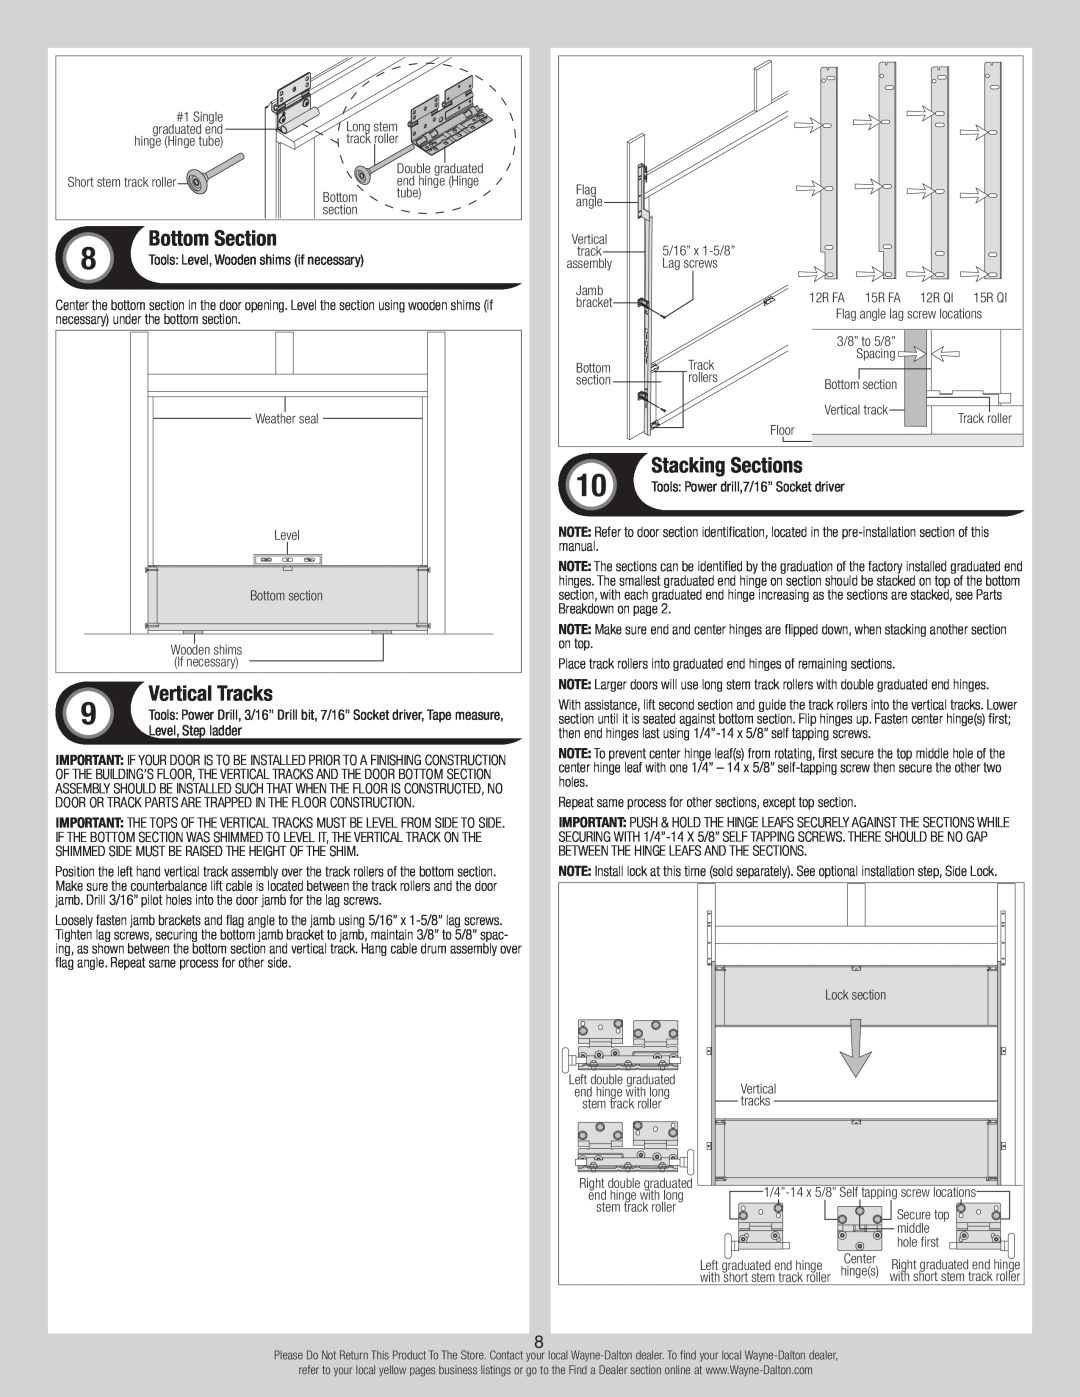 Wayne-Dalton 346919 installation instructions Bottom Section, Vertical Tracks, Stacking Sections 